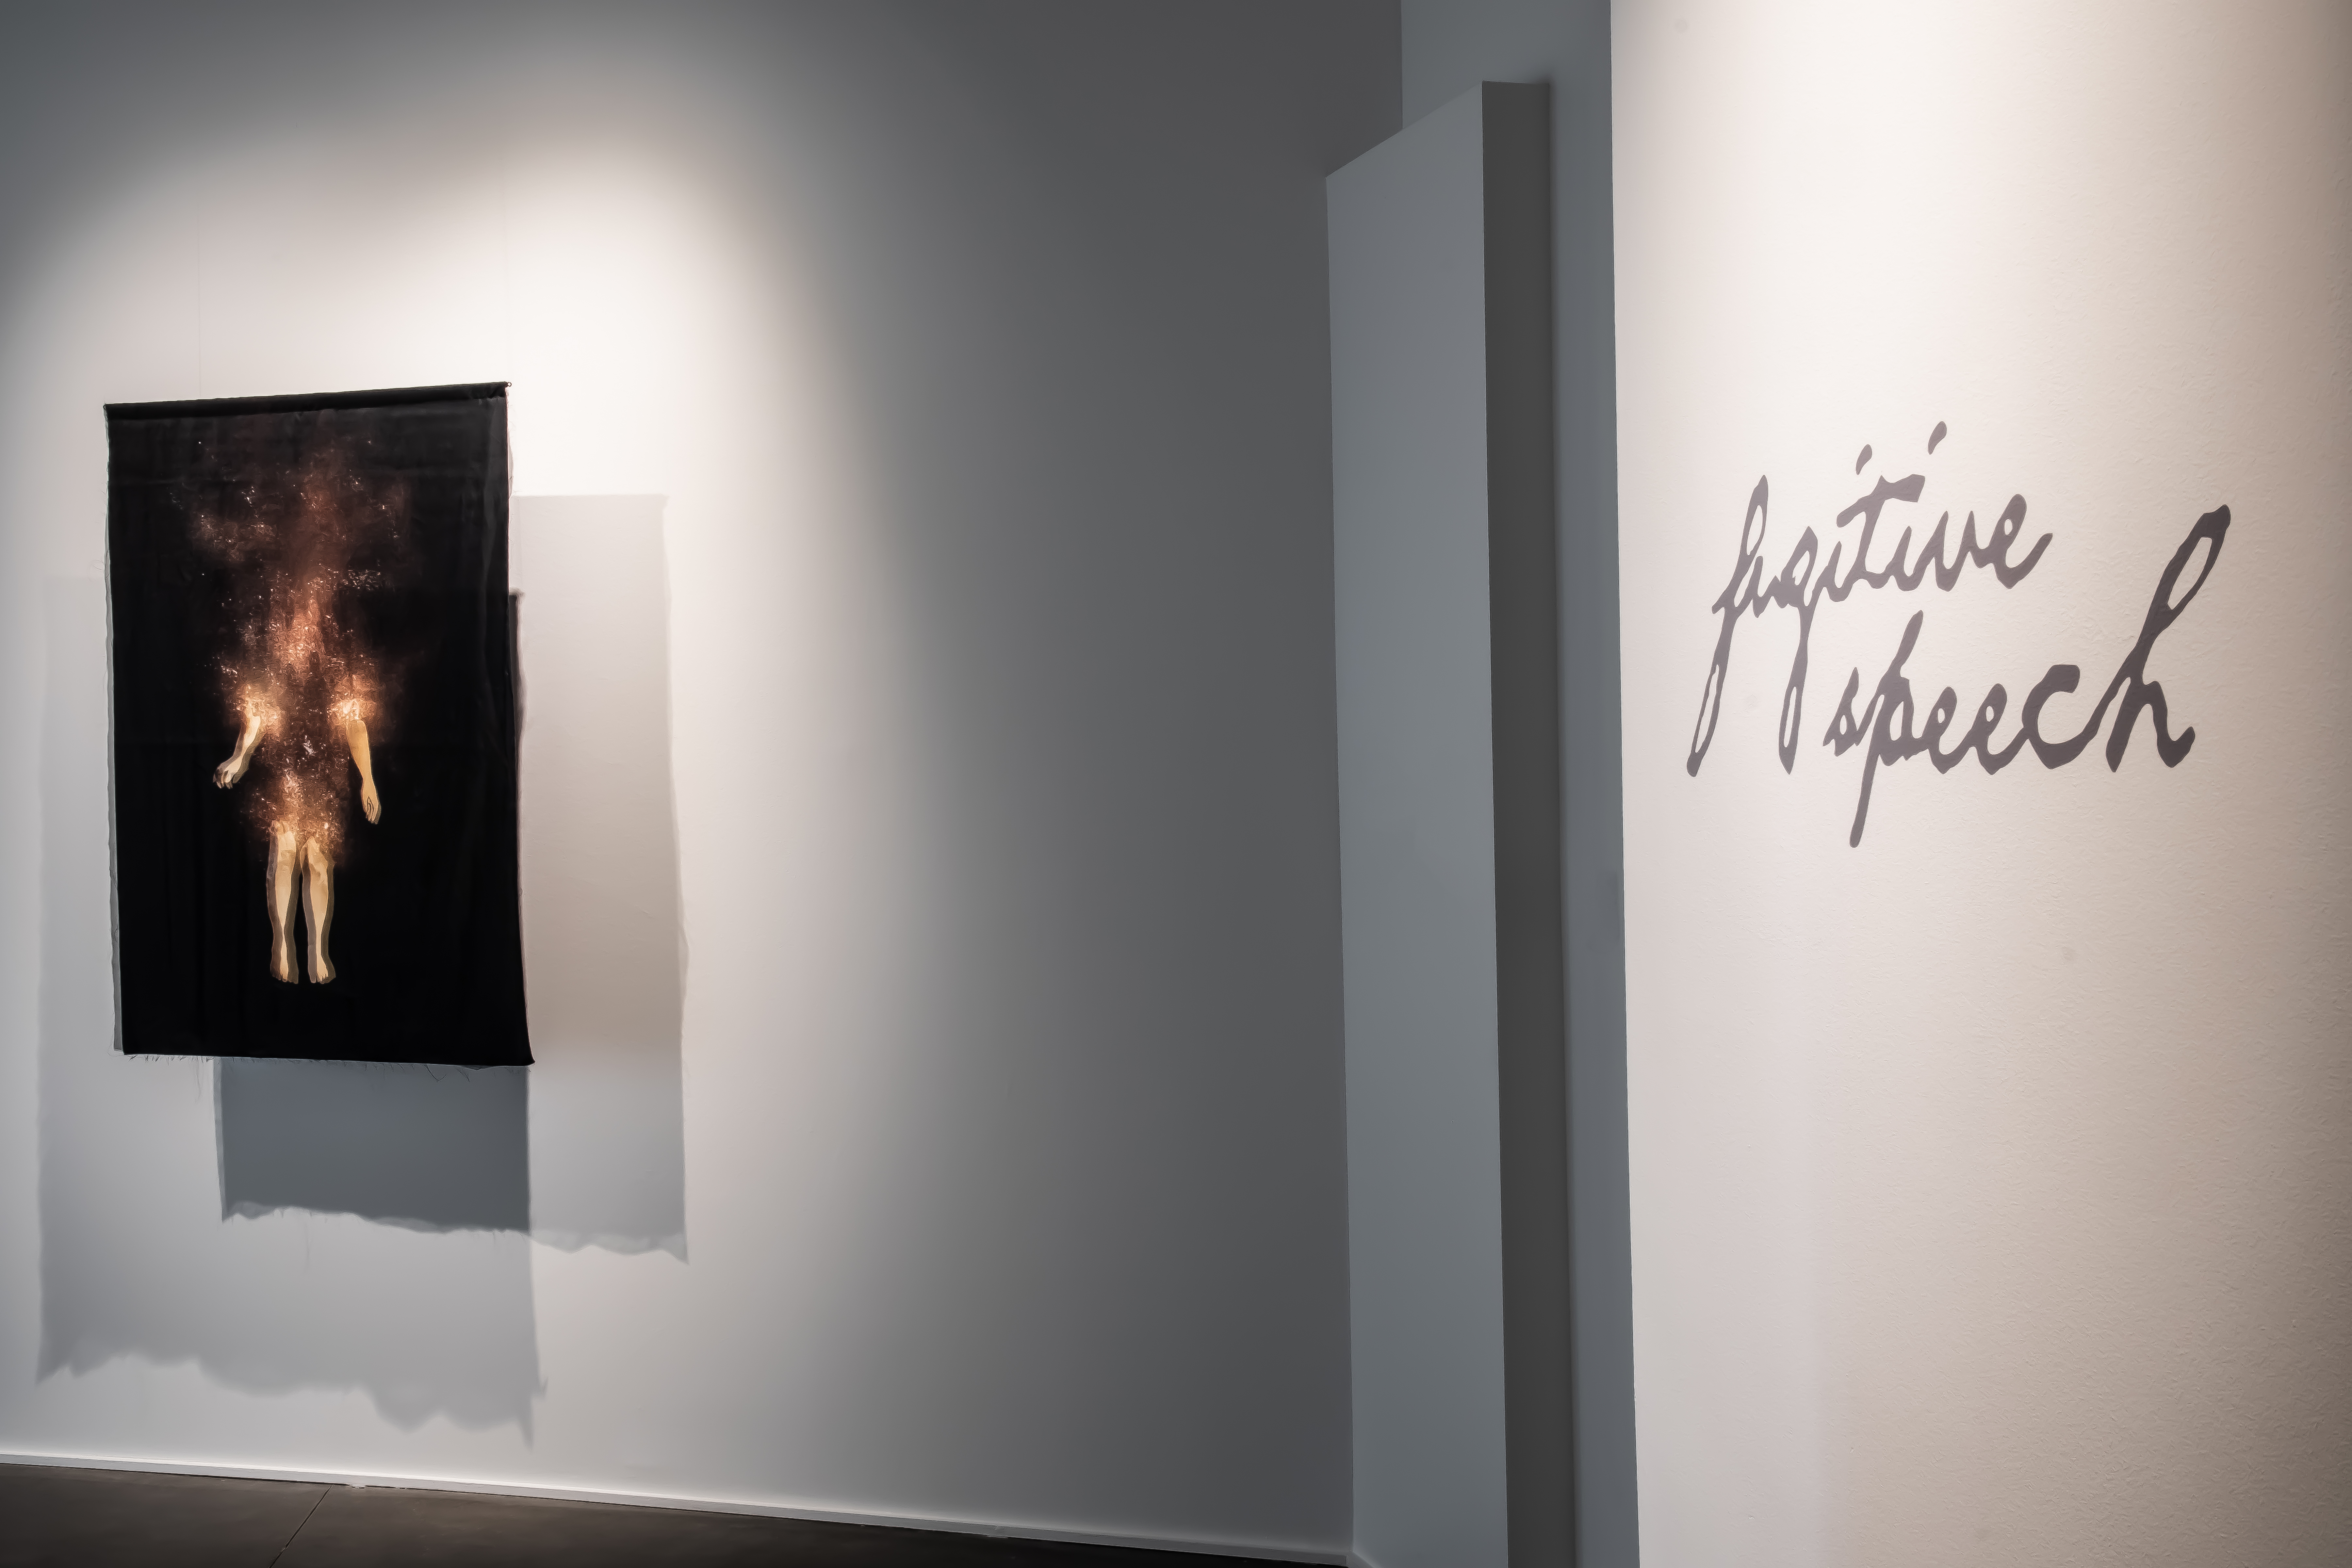 A fiber artwork hangs on a white wall. Adjacent, the words "fugitive speech" are written in gray cursive on the wall. The artwork is a black piece of fiber with a disembodied figure floating in the center.